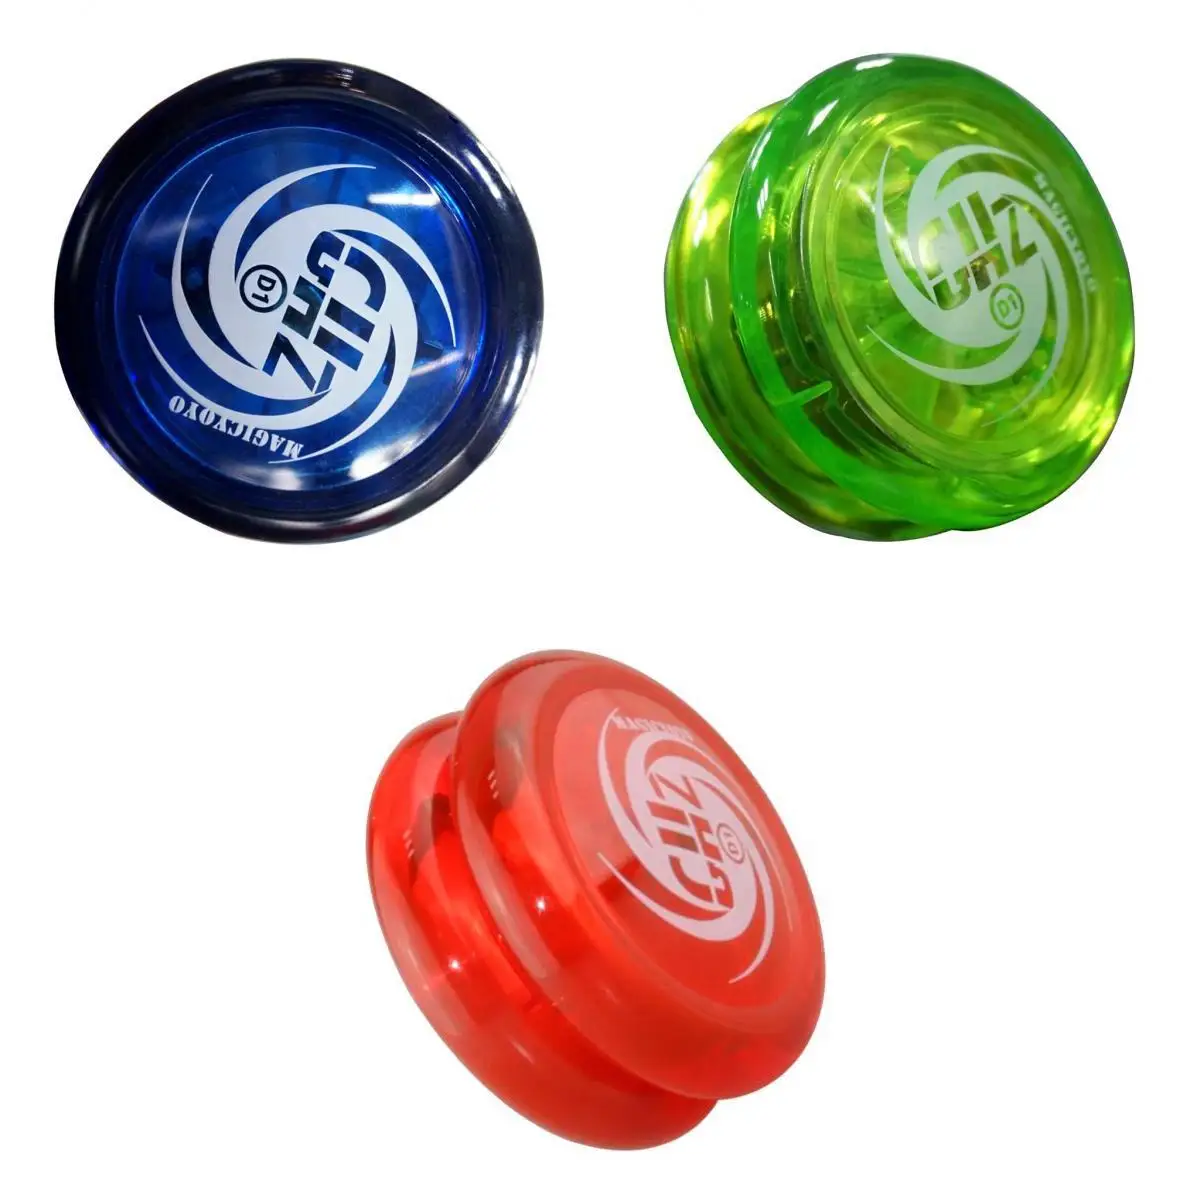 D1 Responsive Professional ABS Yo-yo Ball with Durable String (Pack of 3) Kids Children Gifts Size E Bearing Size E Bearing